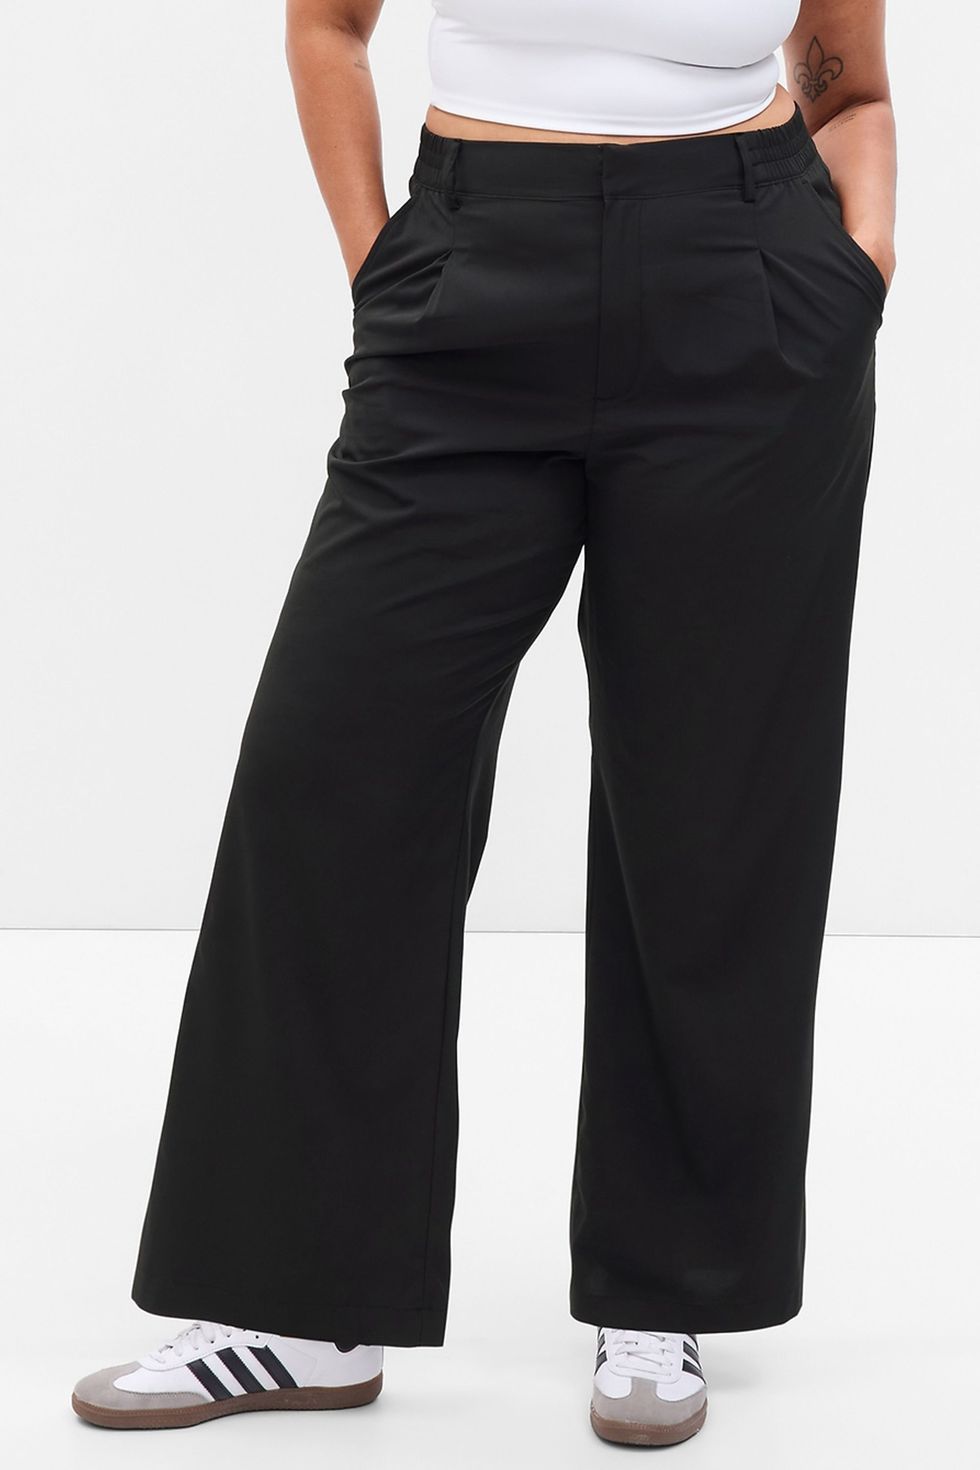 Comfy Work Pants Women Photos, Download The BEST Free Comfy Work